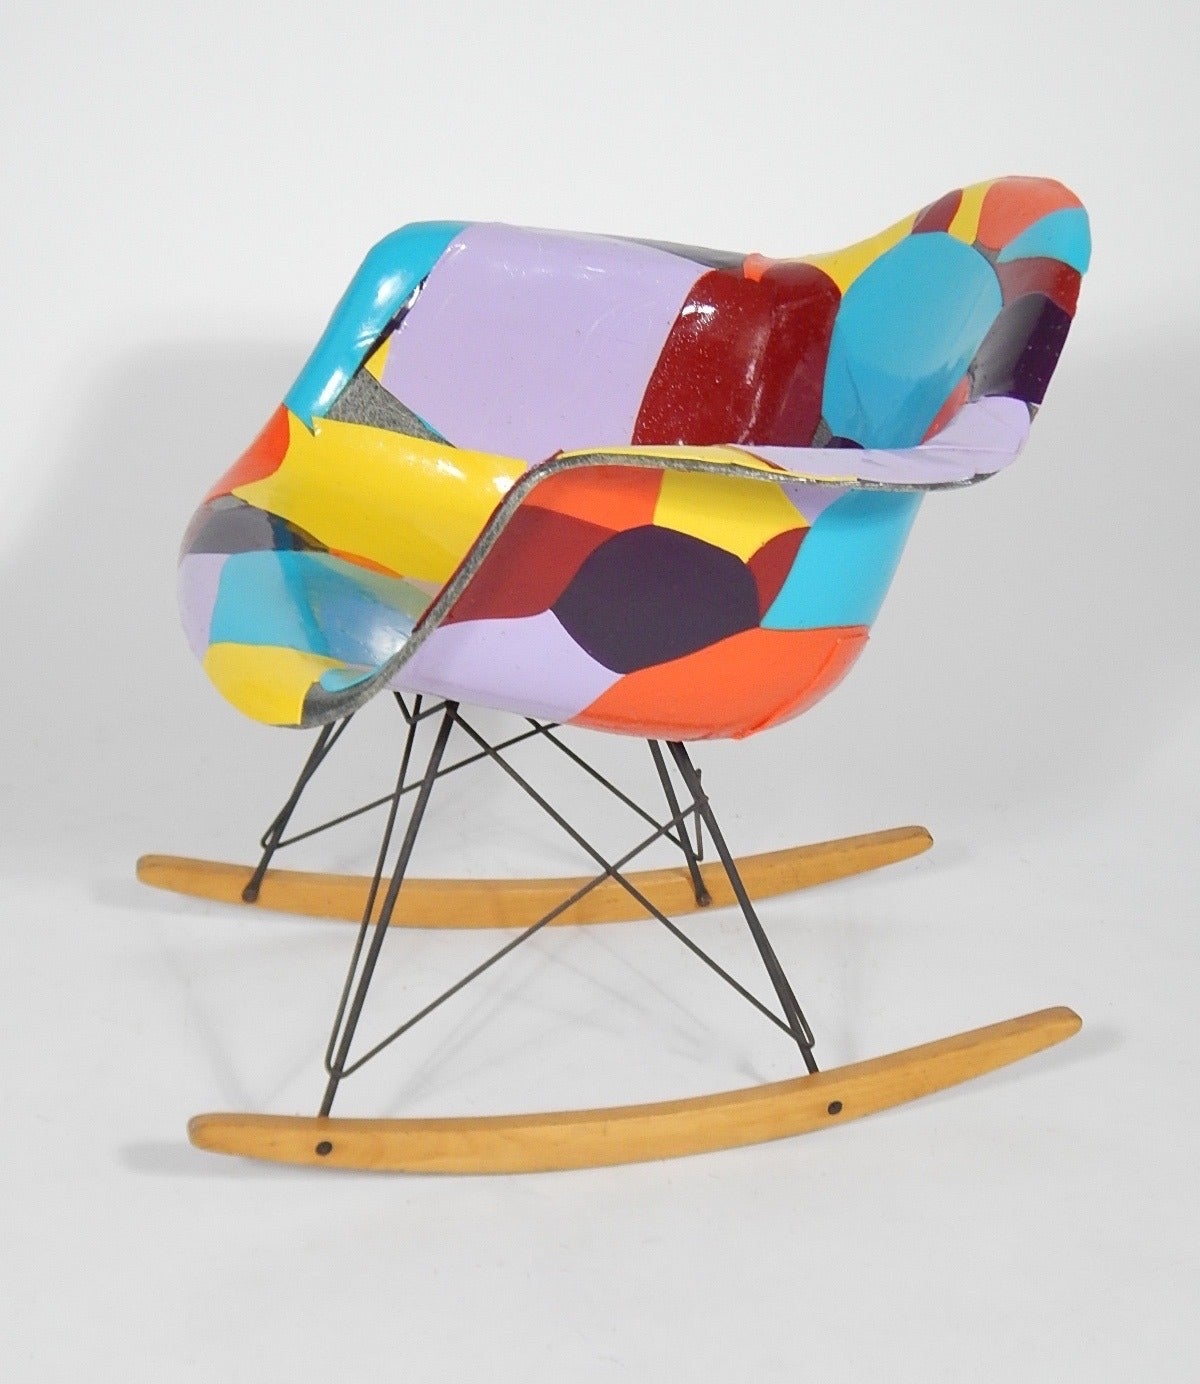 An original and early fiberglass elephant grey rocker by Charles and Ray Eames for Herman Miller, circa 1950s updated by artist Jim Oliveira in acrylic gloss medium, signed and dated 2005, titled 